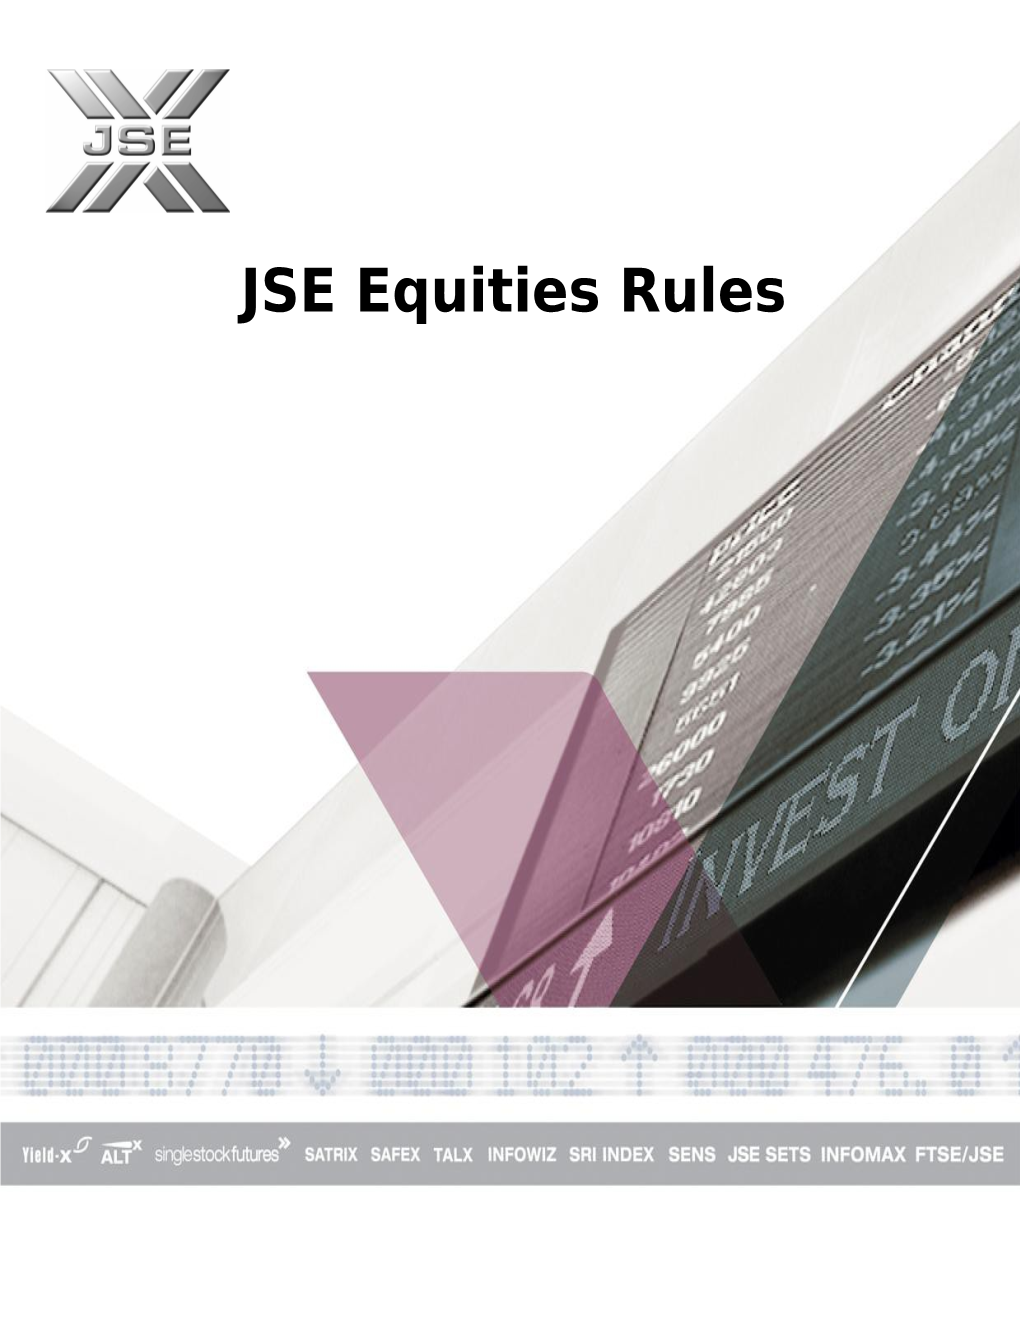 JSE Equities Rules - 28 March 2014